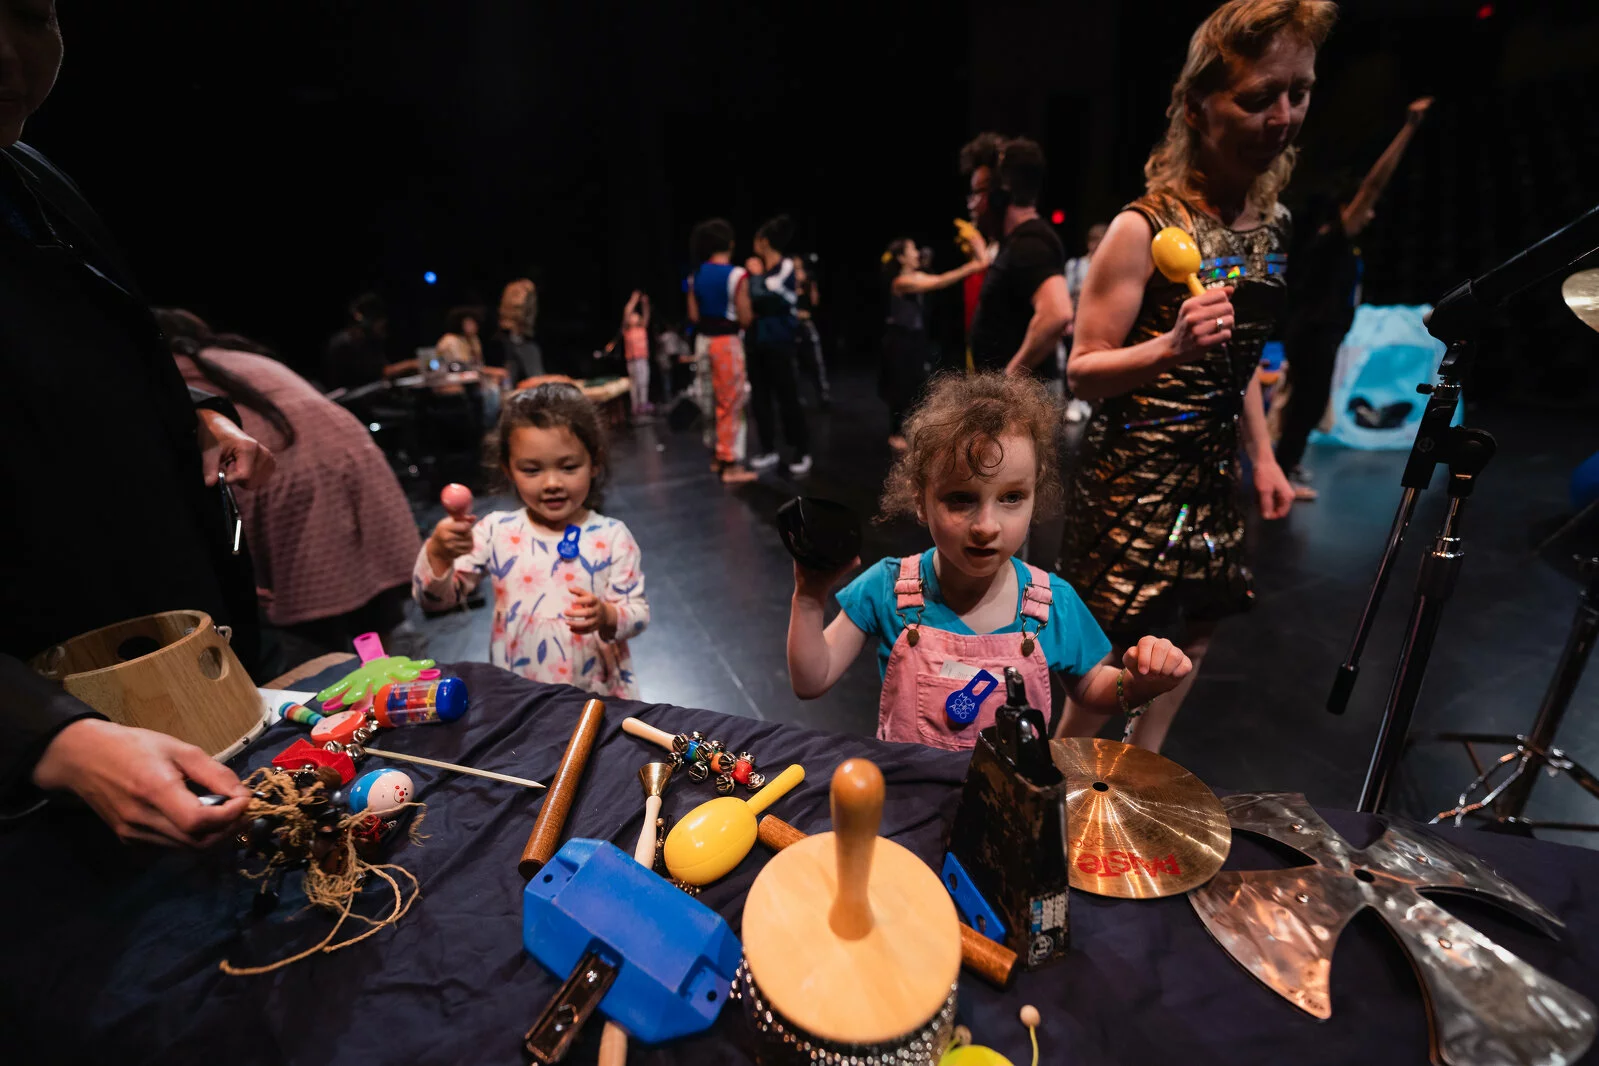 Kids and adults gather around tables filled with various noise making objects on a black stage.